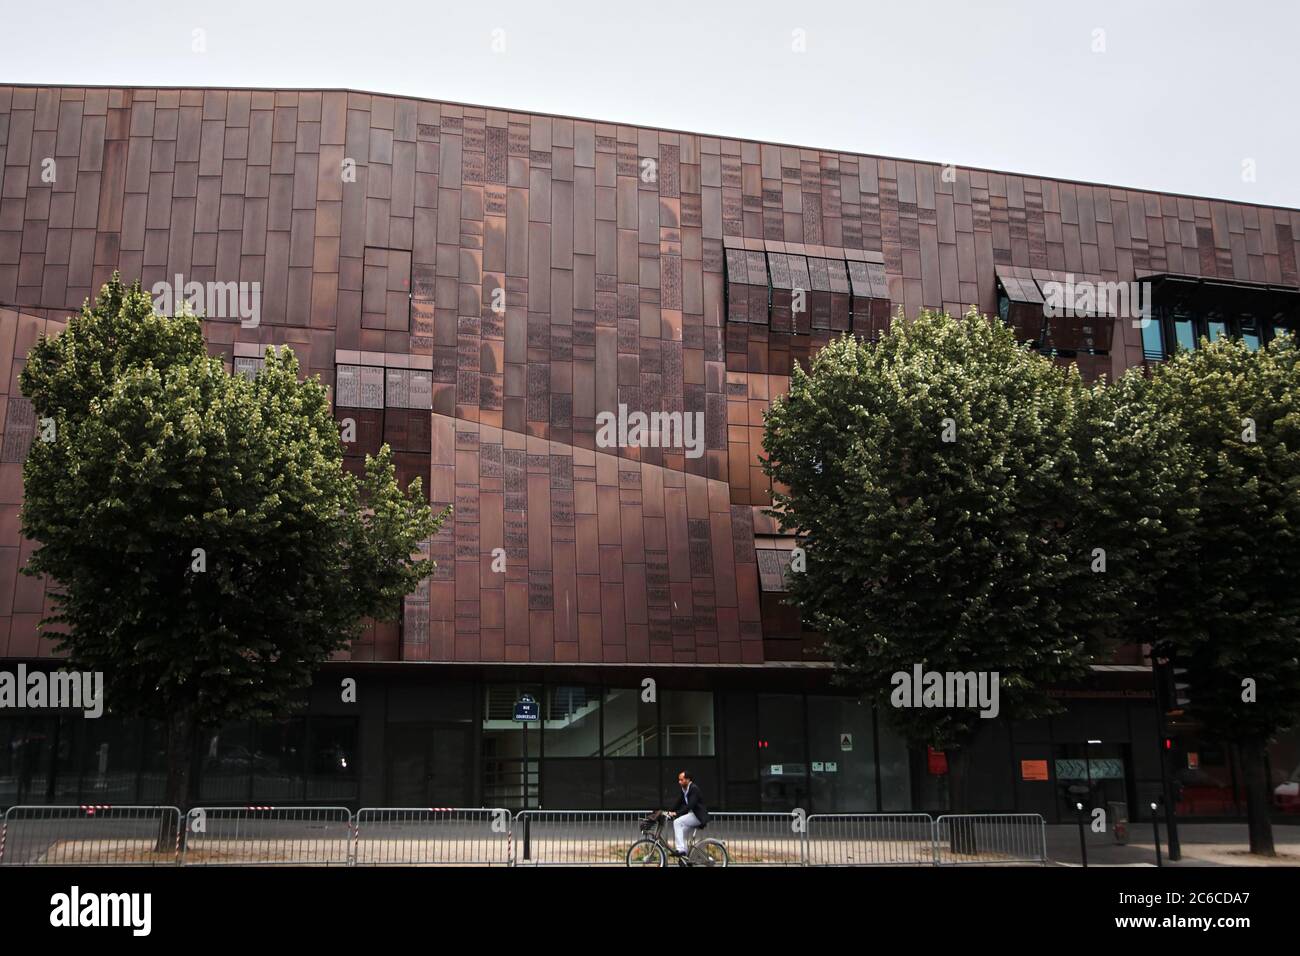 Paris, France - June 18, 2015: The Conservatoire Claude Debussy, municipal conservatory of music, dance and dramatic arts. New modern Architecture of Stock Photo